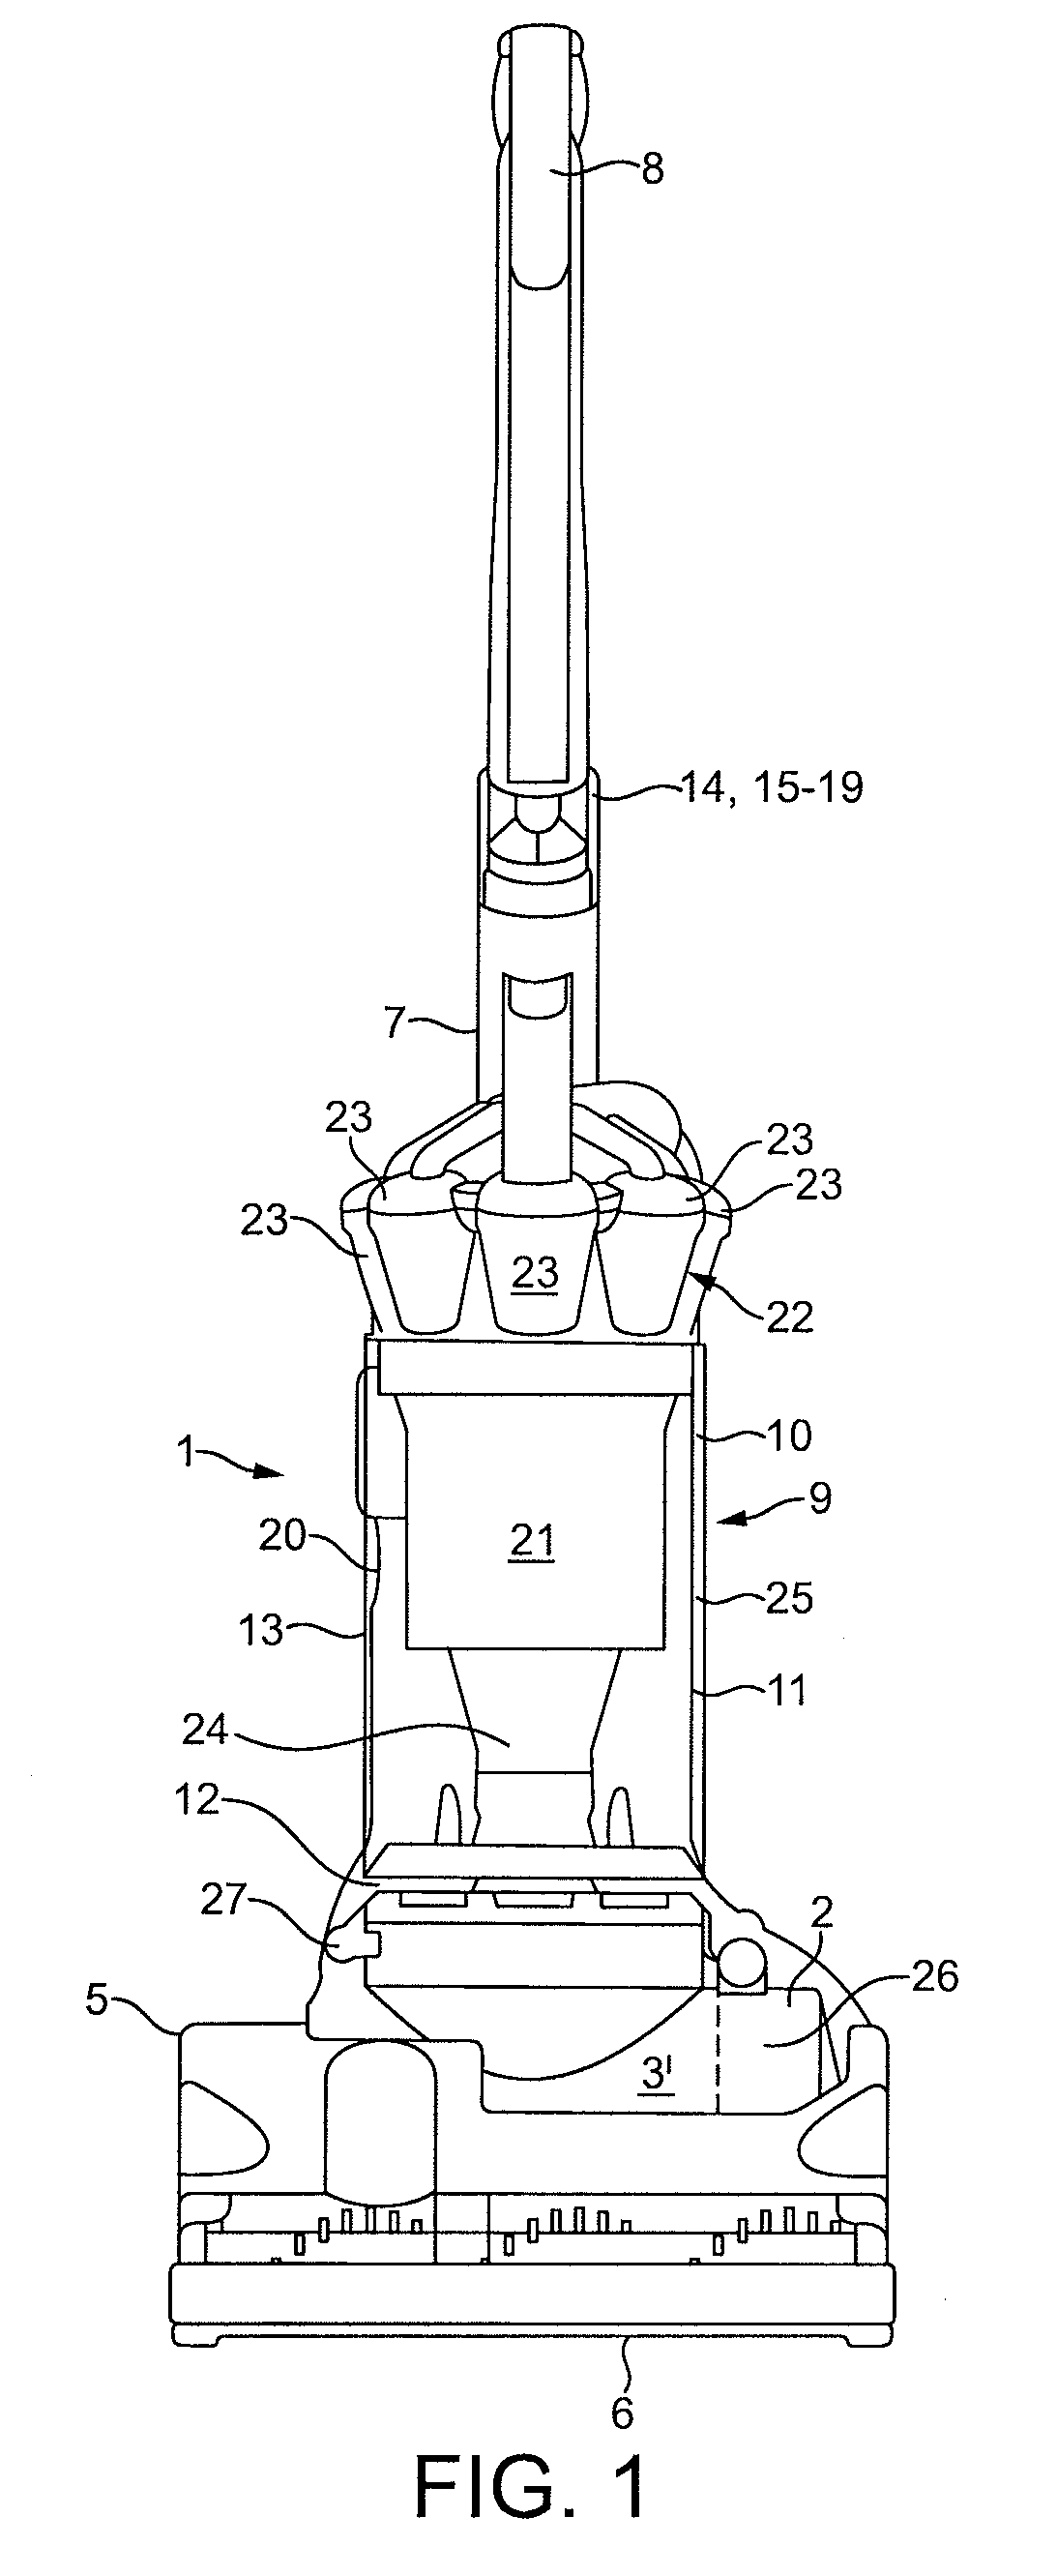 Surface treating head assembly